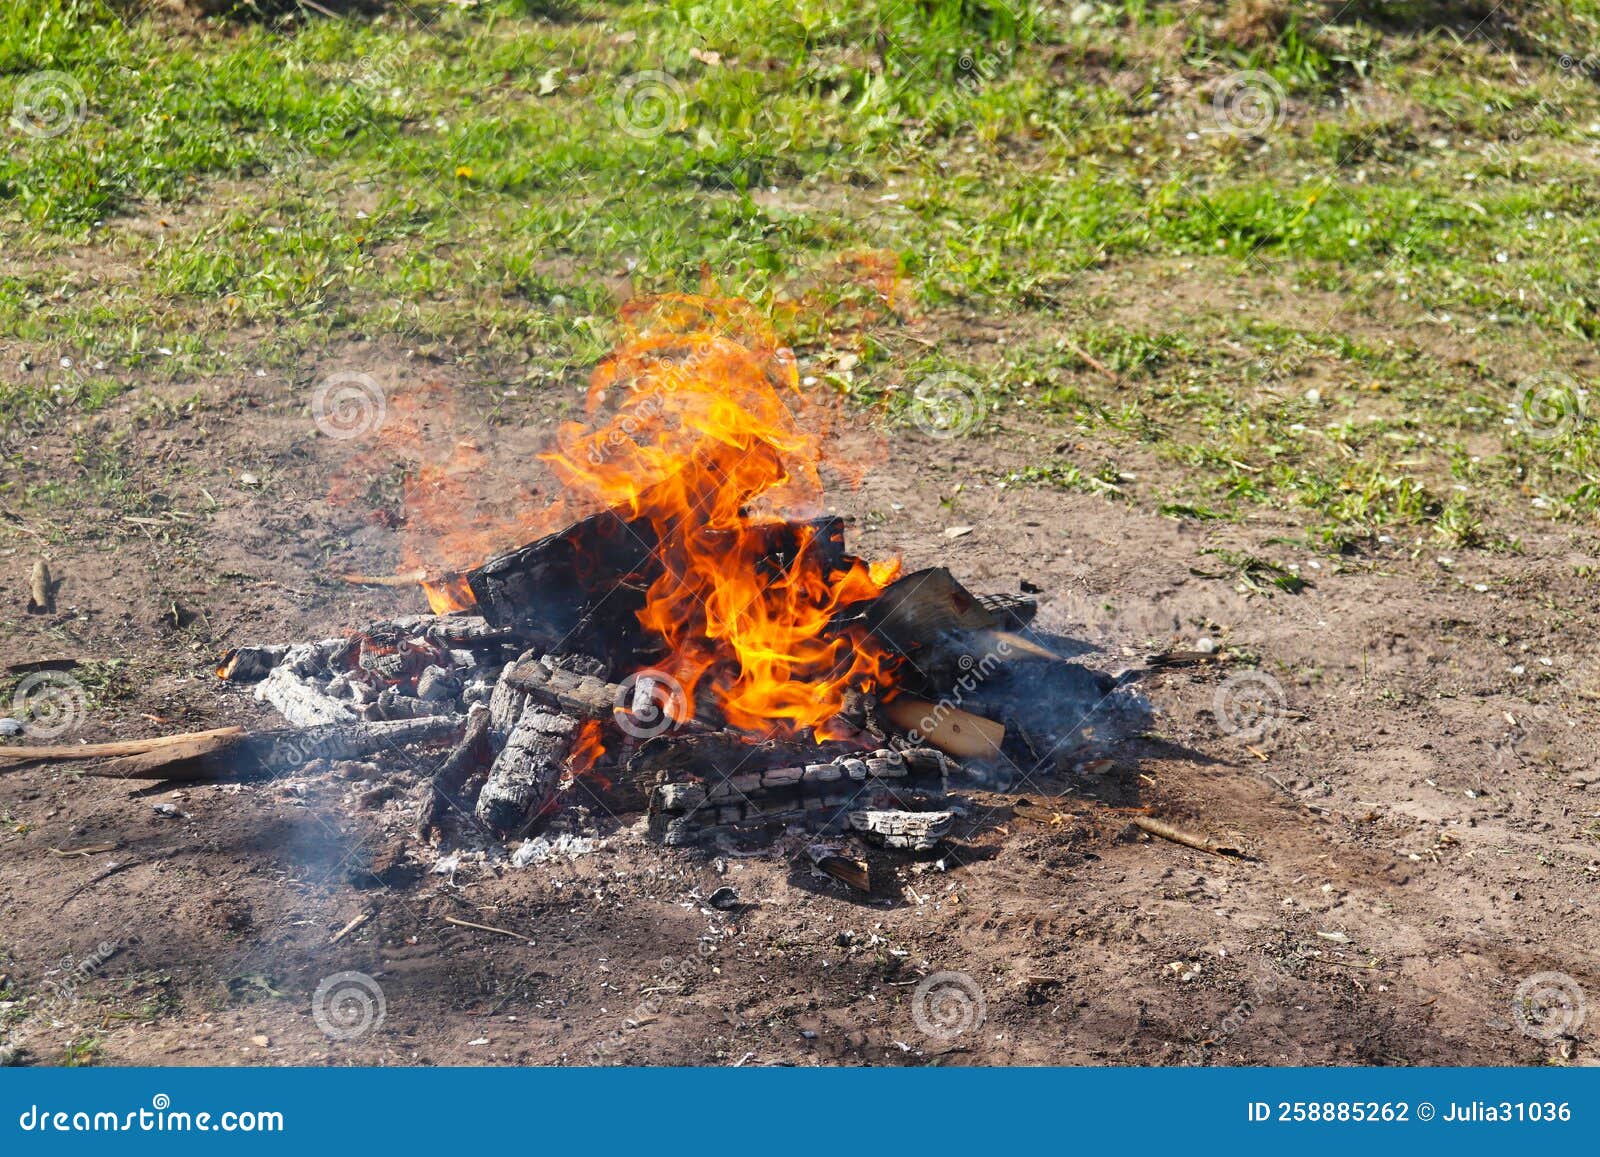 Photo of a Summer Campfire and a Smoldering Stock Photo - Image of heat ...